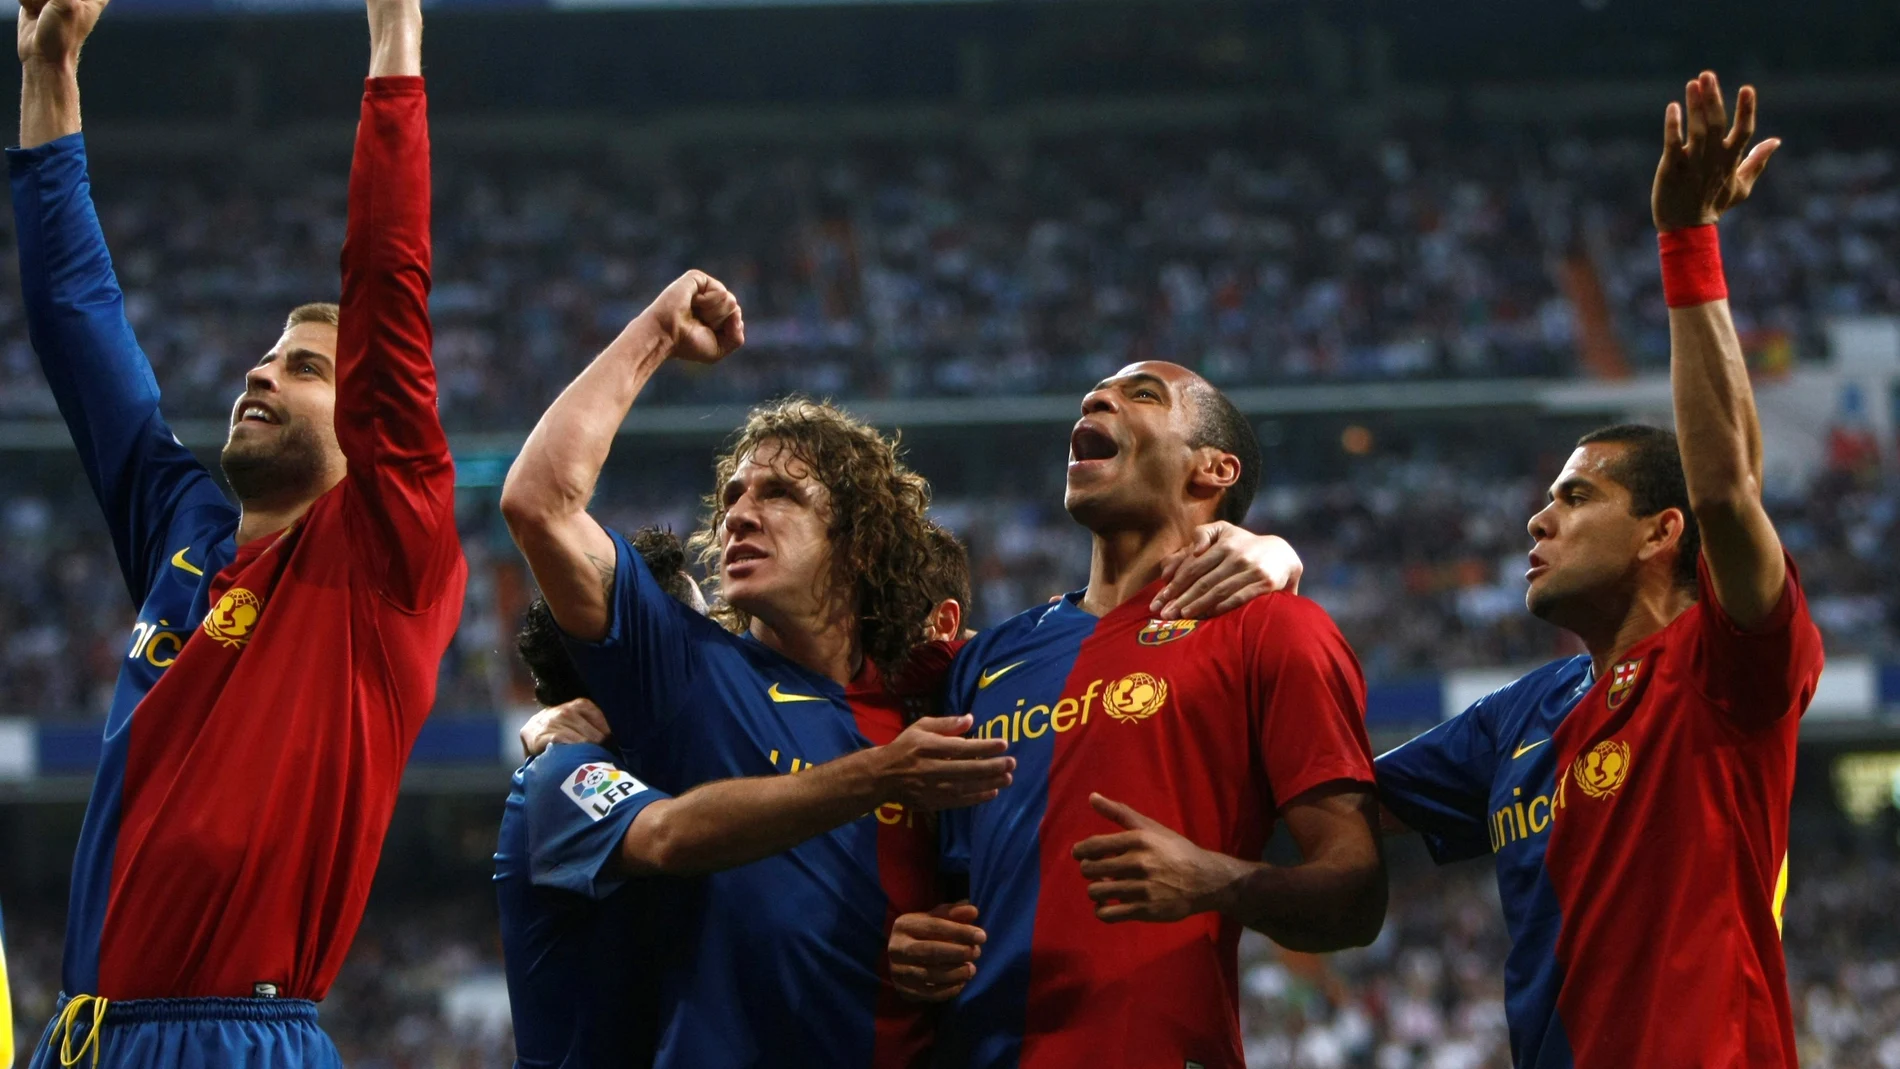 FILE PHOTO: Barcelona's Gerard Pique, Carles Puyol, Thierry Henry and Daniel Alves celebrate a goal in their 6-2 La Liga victory over Real Madrid at the Santiago Bernabeu stadium in Madrid.